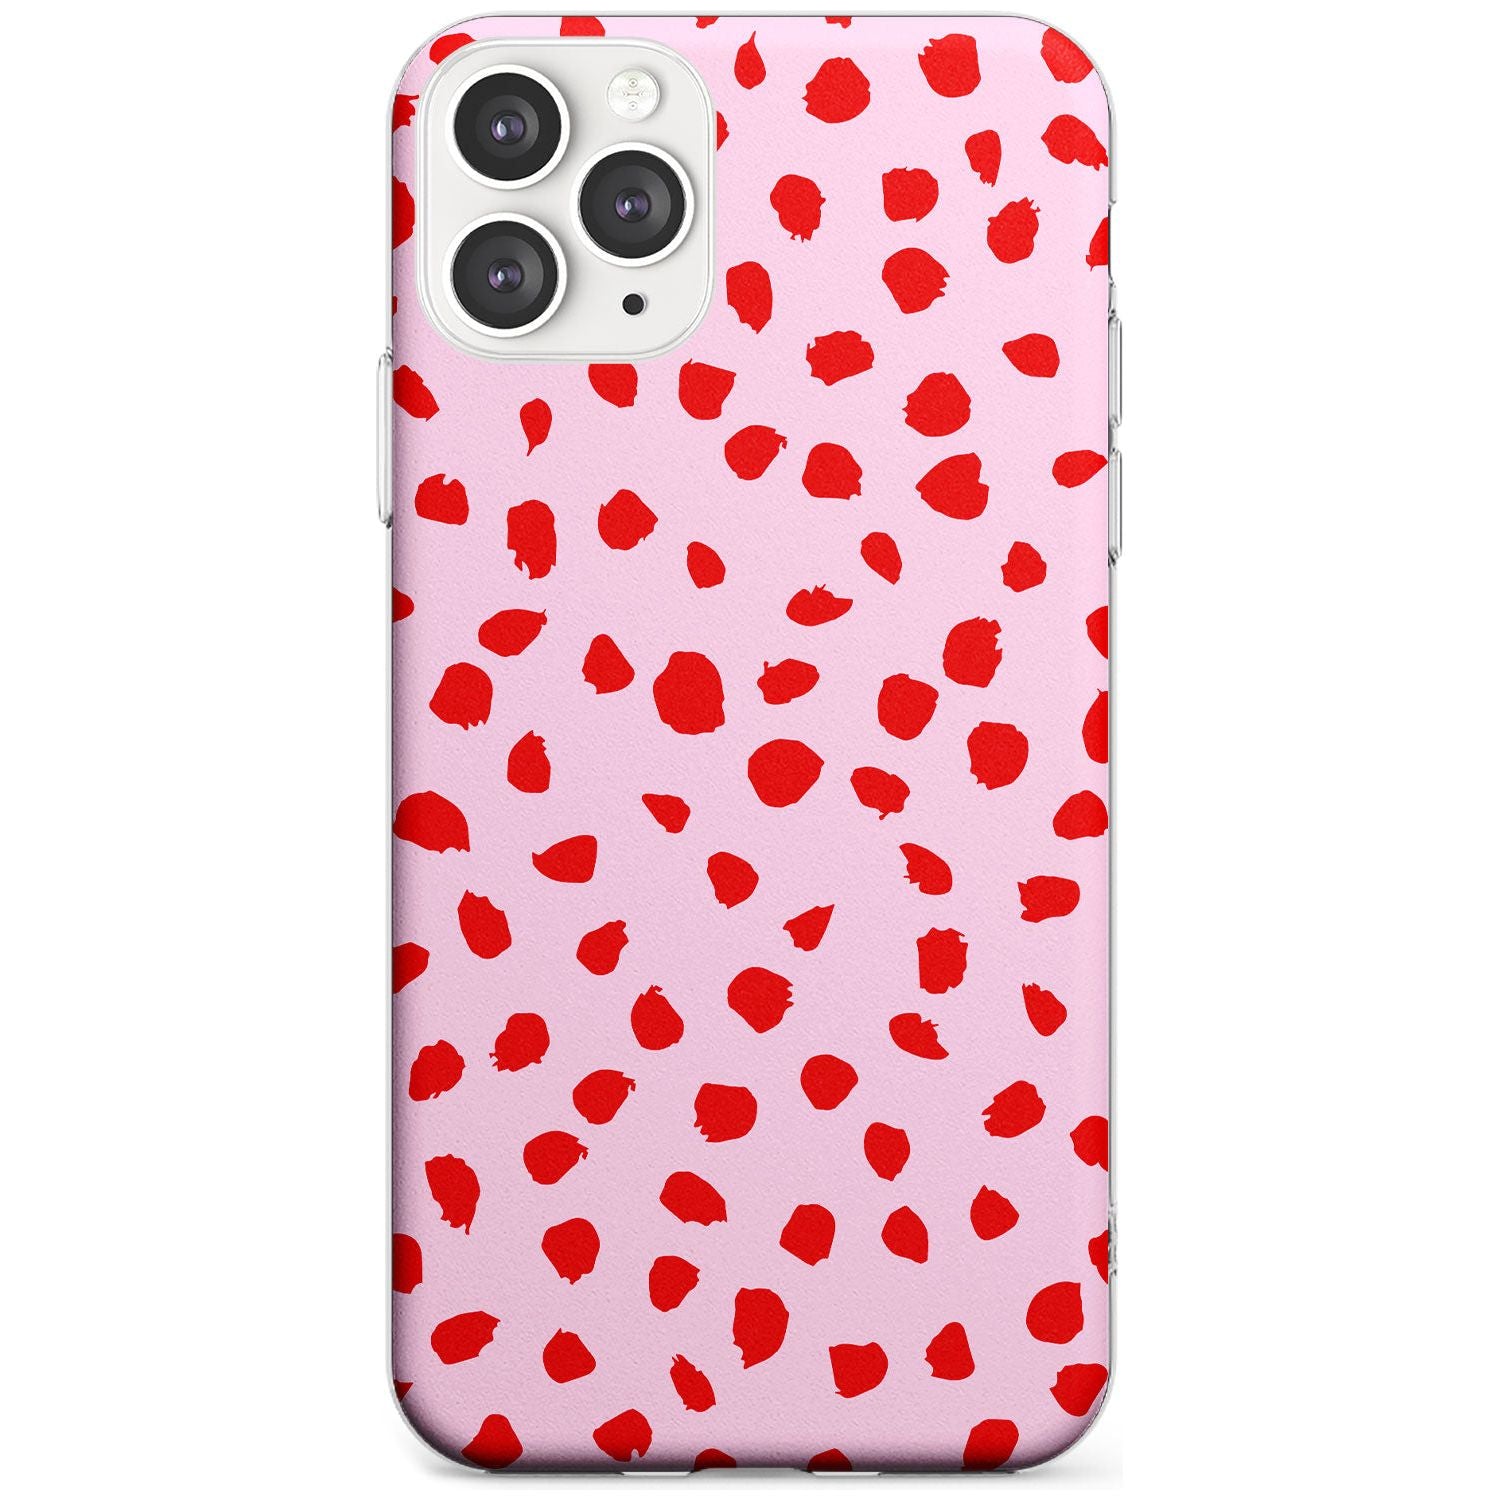 Red on Pink Dalmatian Polka Dot Spots Slim TPU Phone Case for iPhone 11 Pro Max